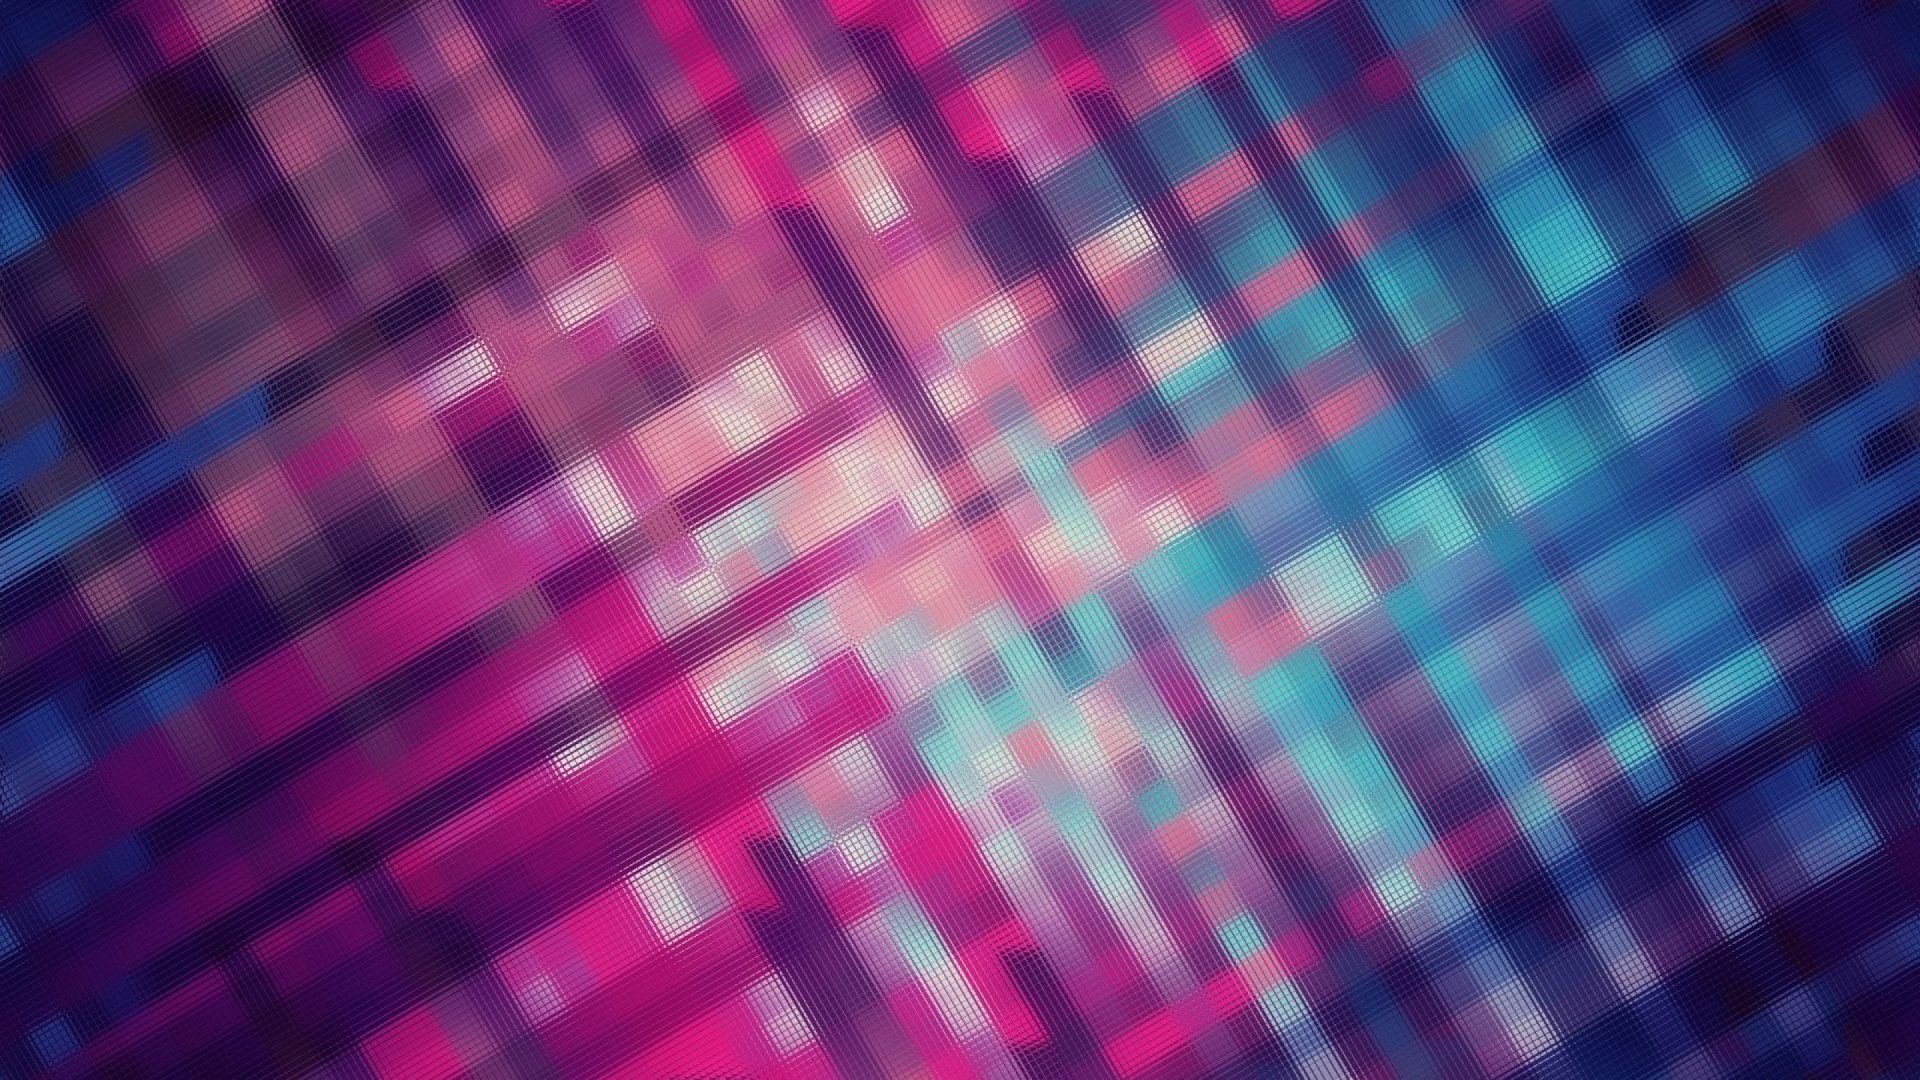 Wallpaper Blurred abstract artwork